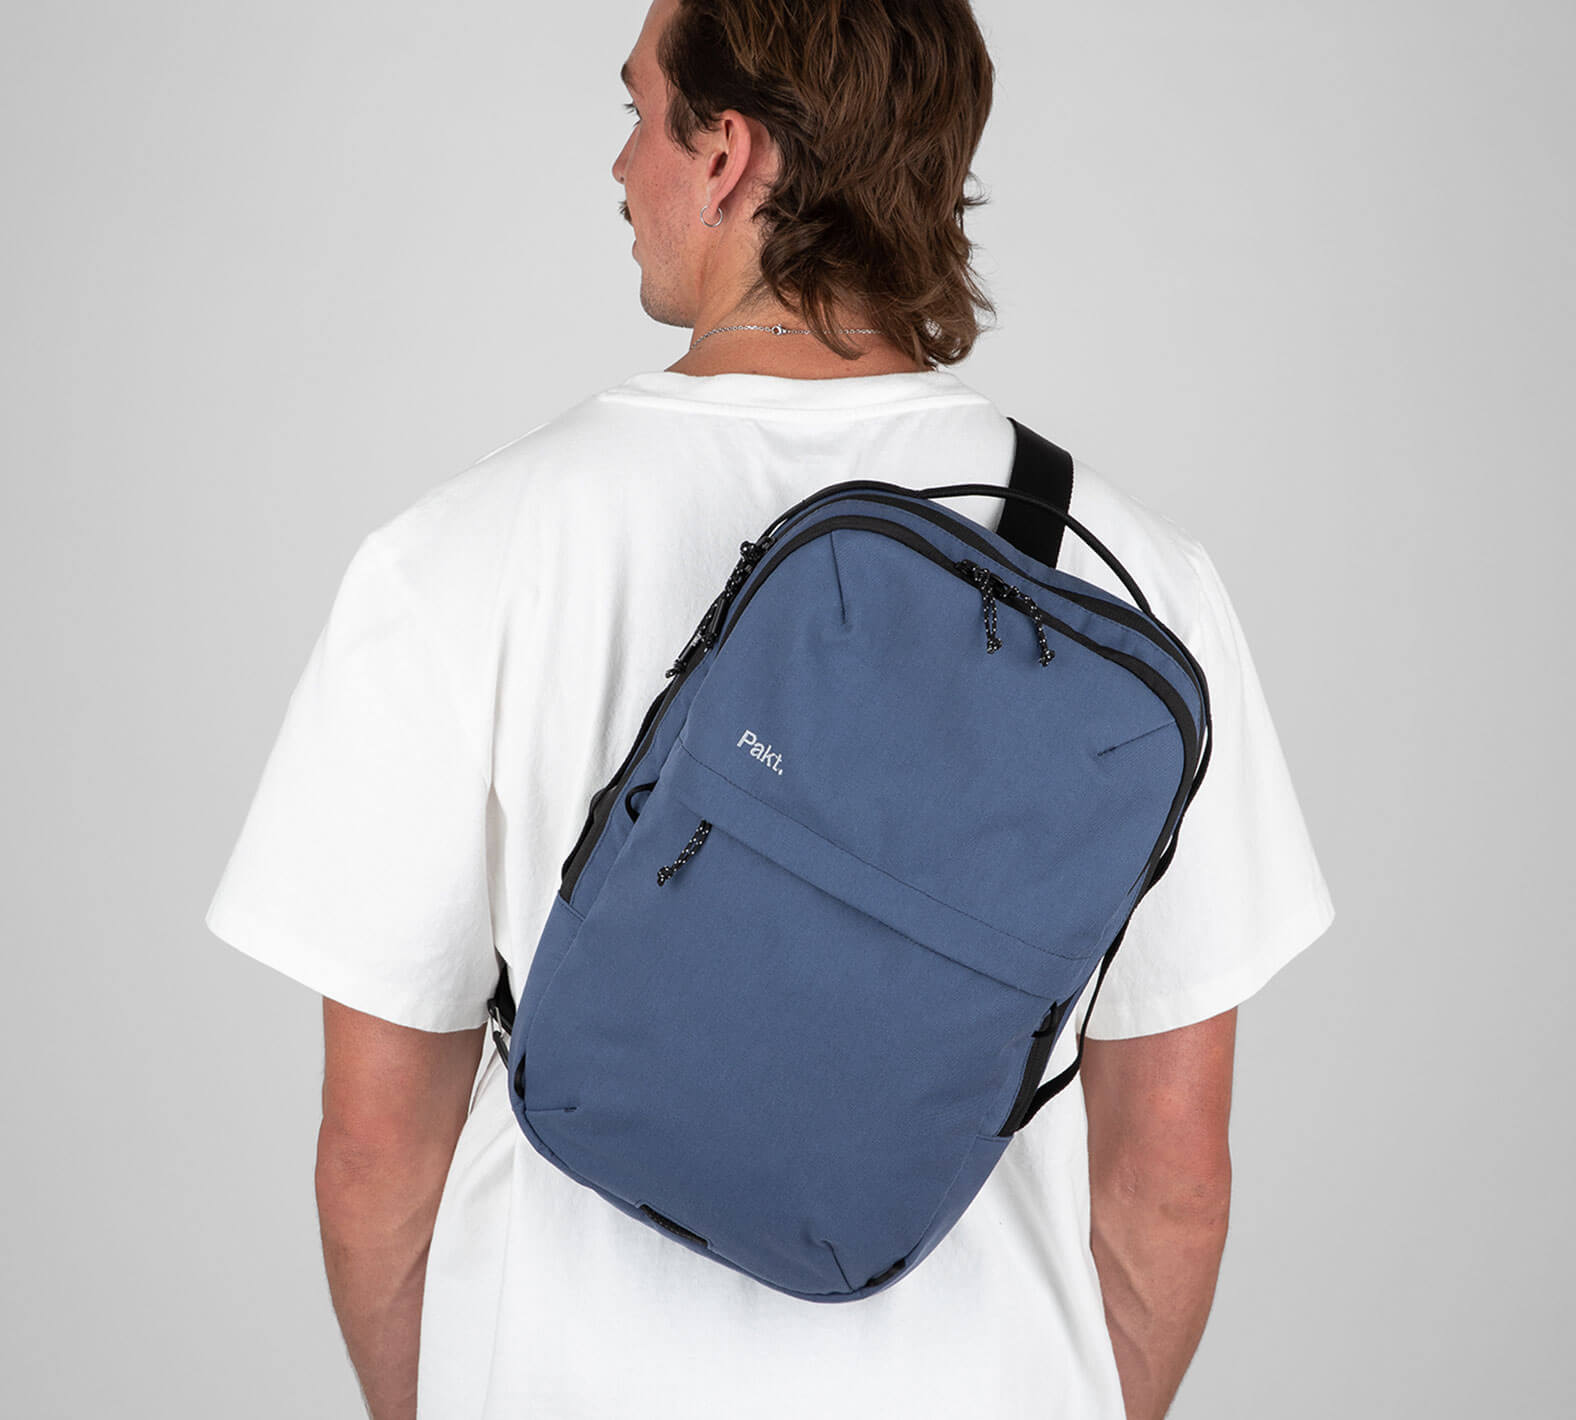 Man with blue sling backpack